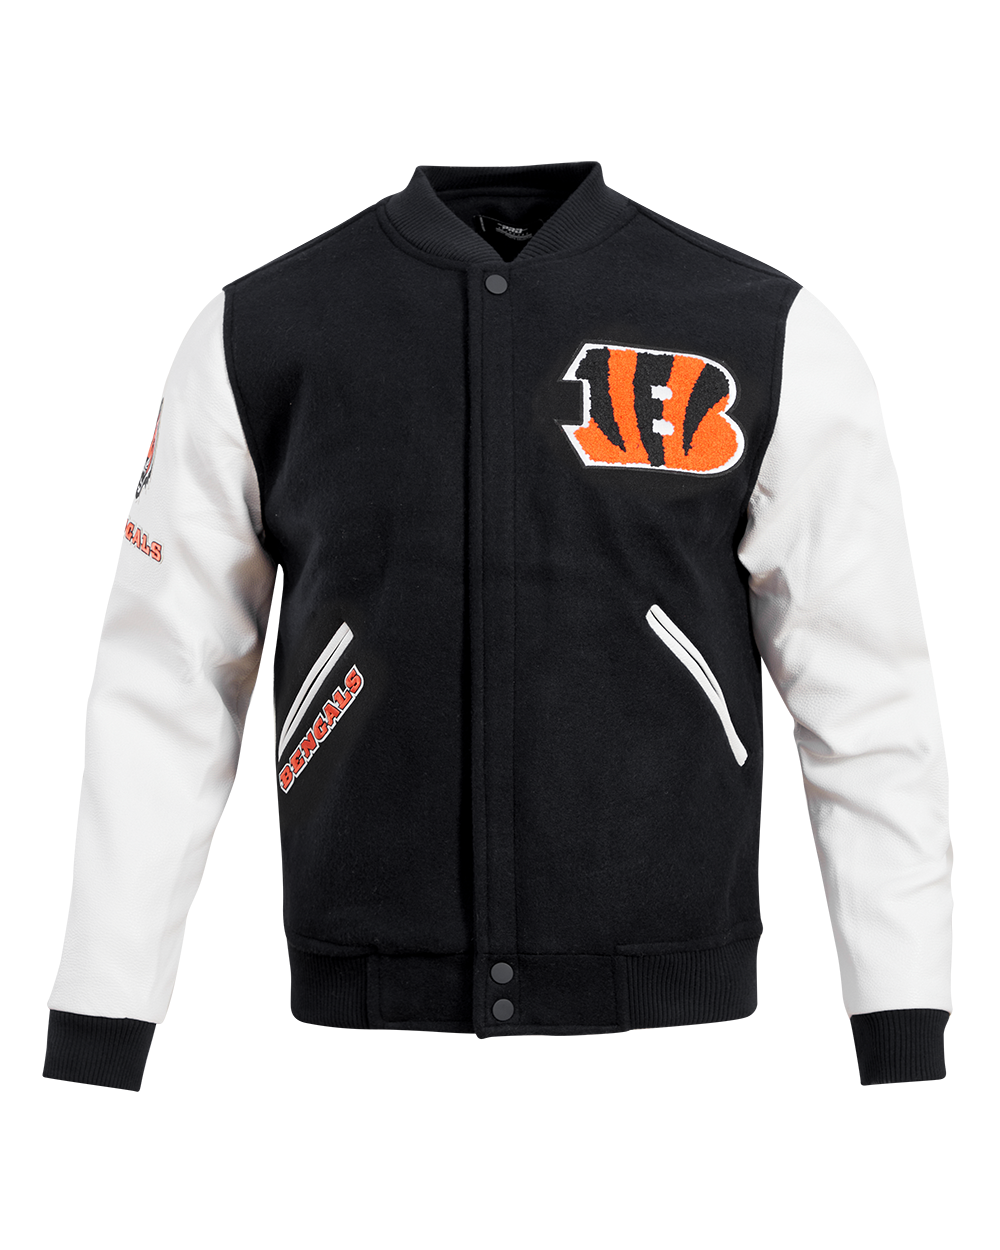 Jackets from NBA, NFL, MLB, NHL & College leagues